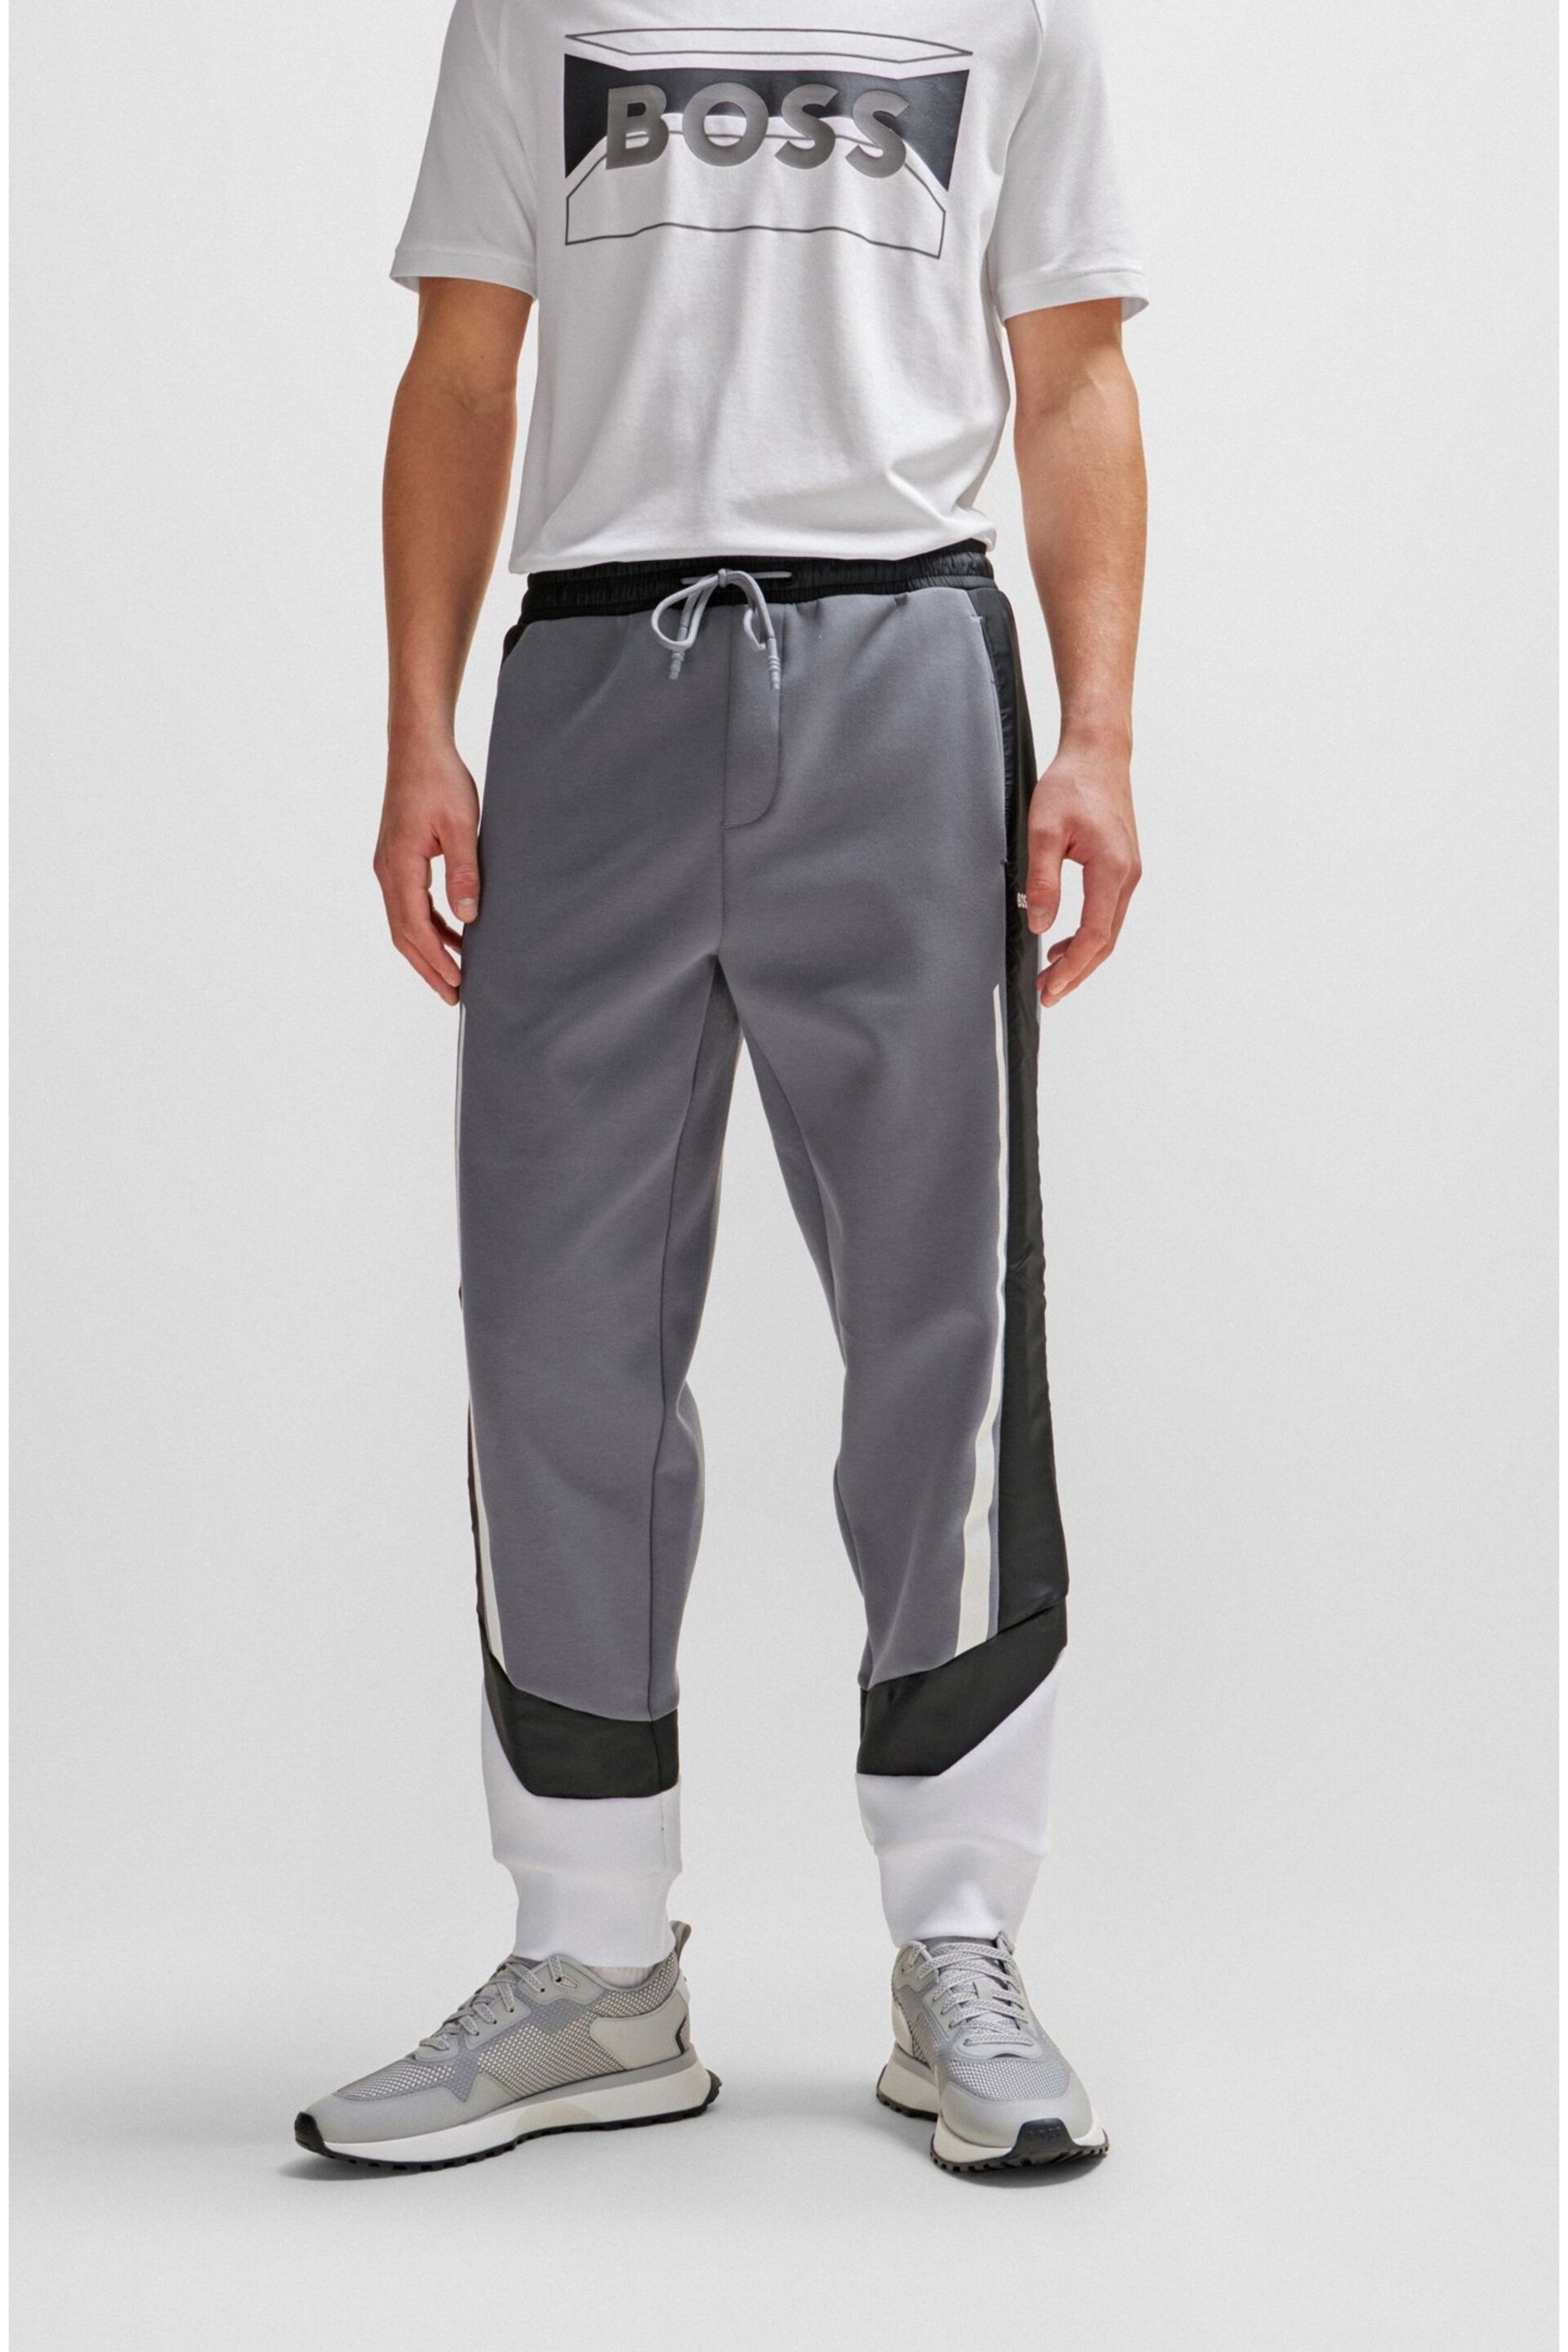 BOSS Grey Relaxed Fit Contrast Panel Sporty Joggers - Image 2 of 7